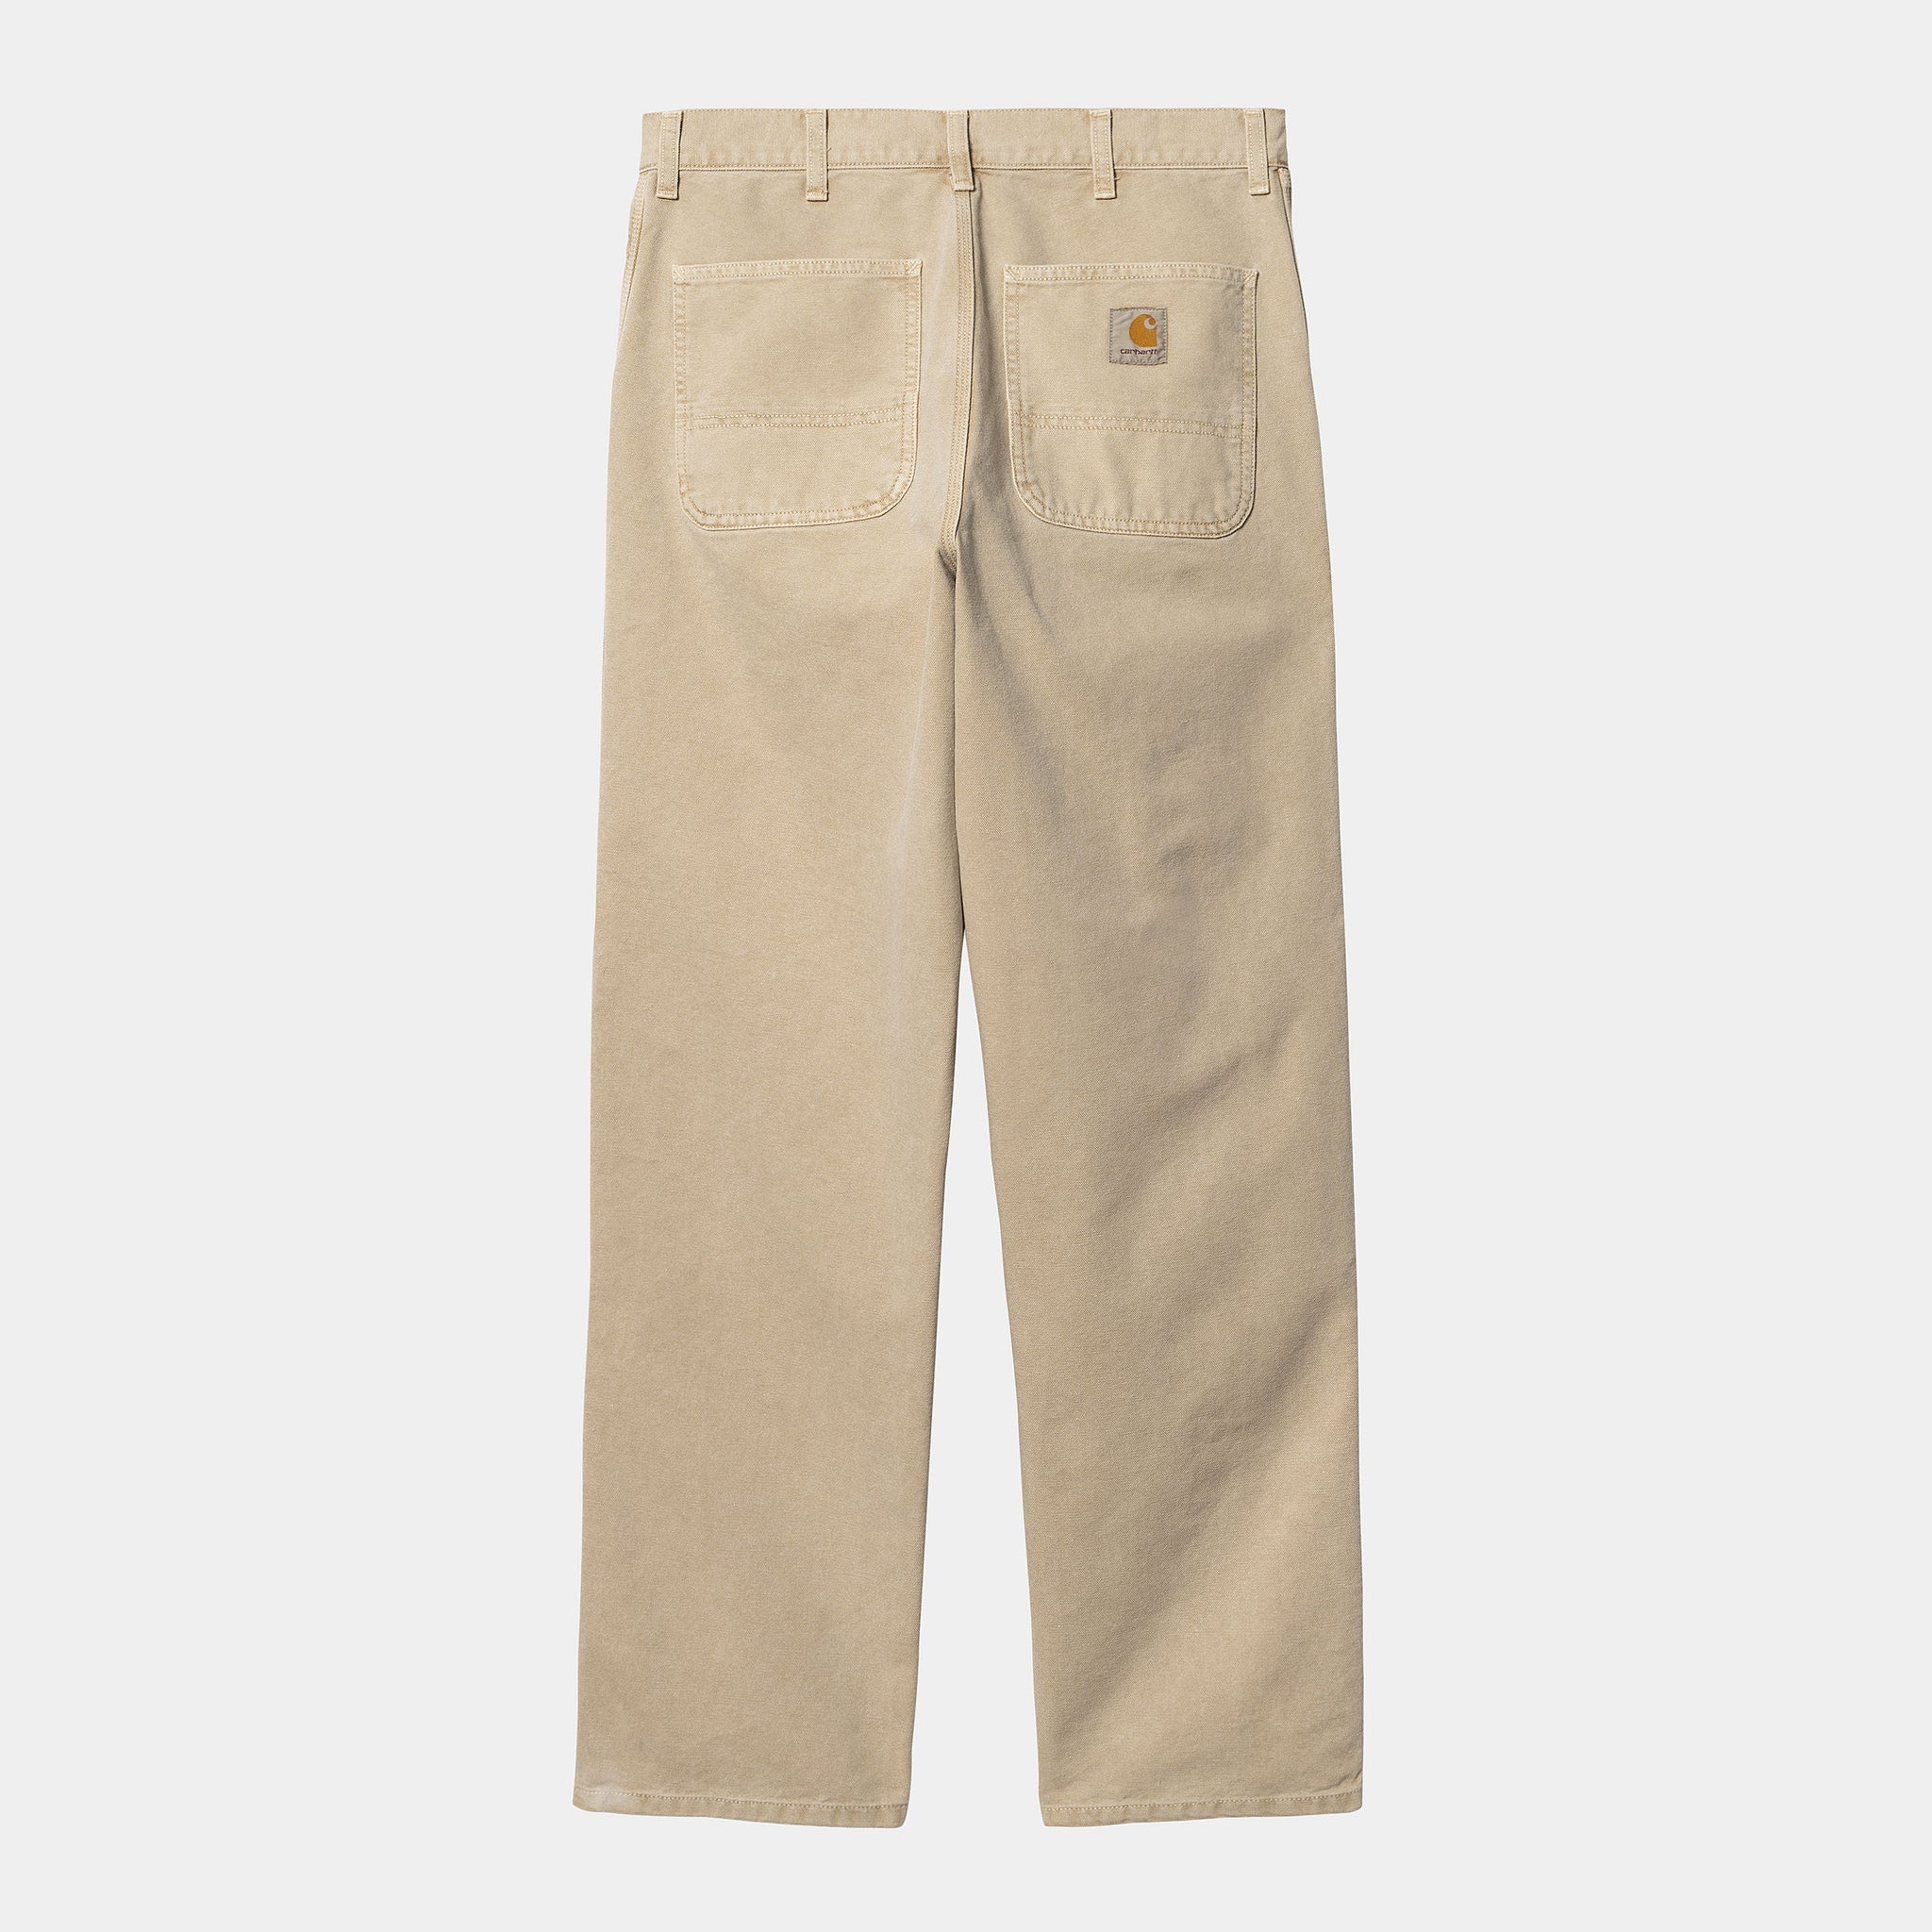 Simple Pant Organic Cotton Dearborn Canvas, 12 oz (Dusty H Brown faded)